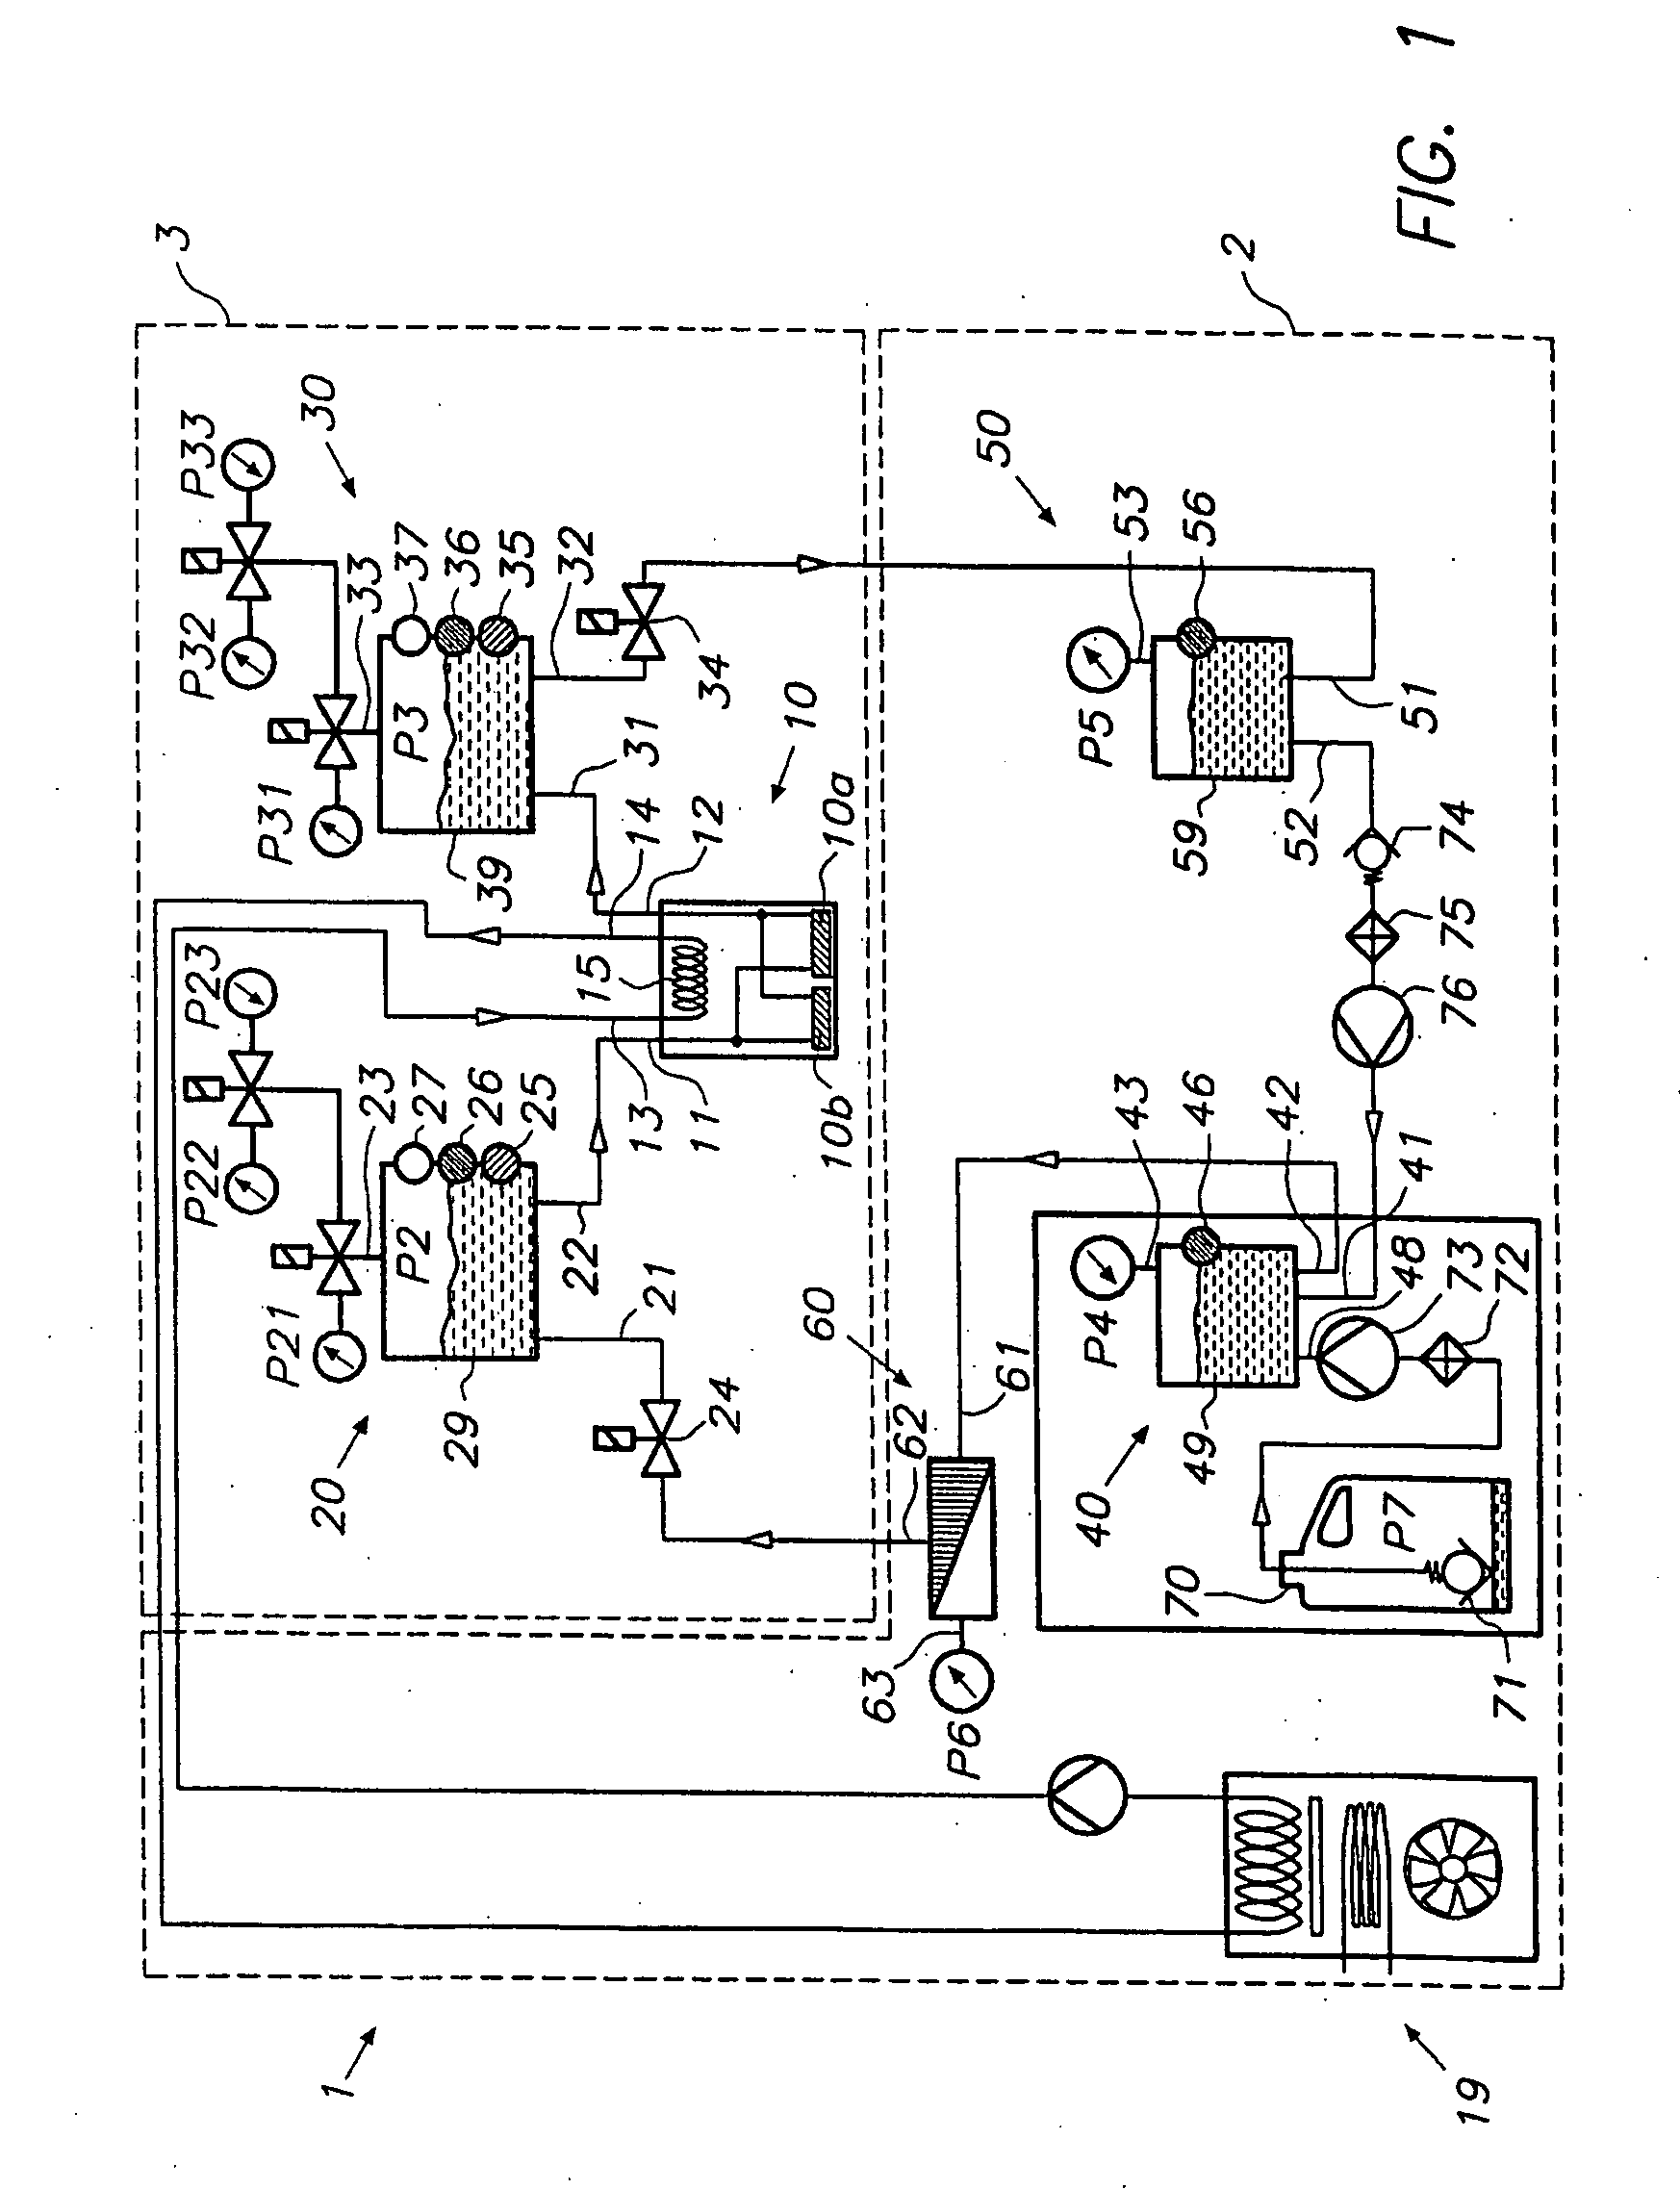 System and Method for Supplying an Ink to a Reciprocating Printhead in an Inkject Apparatus